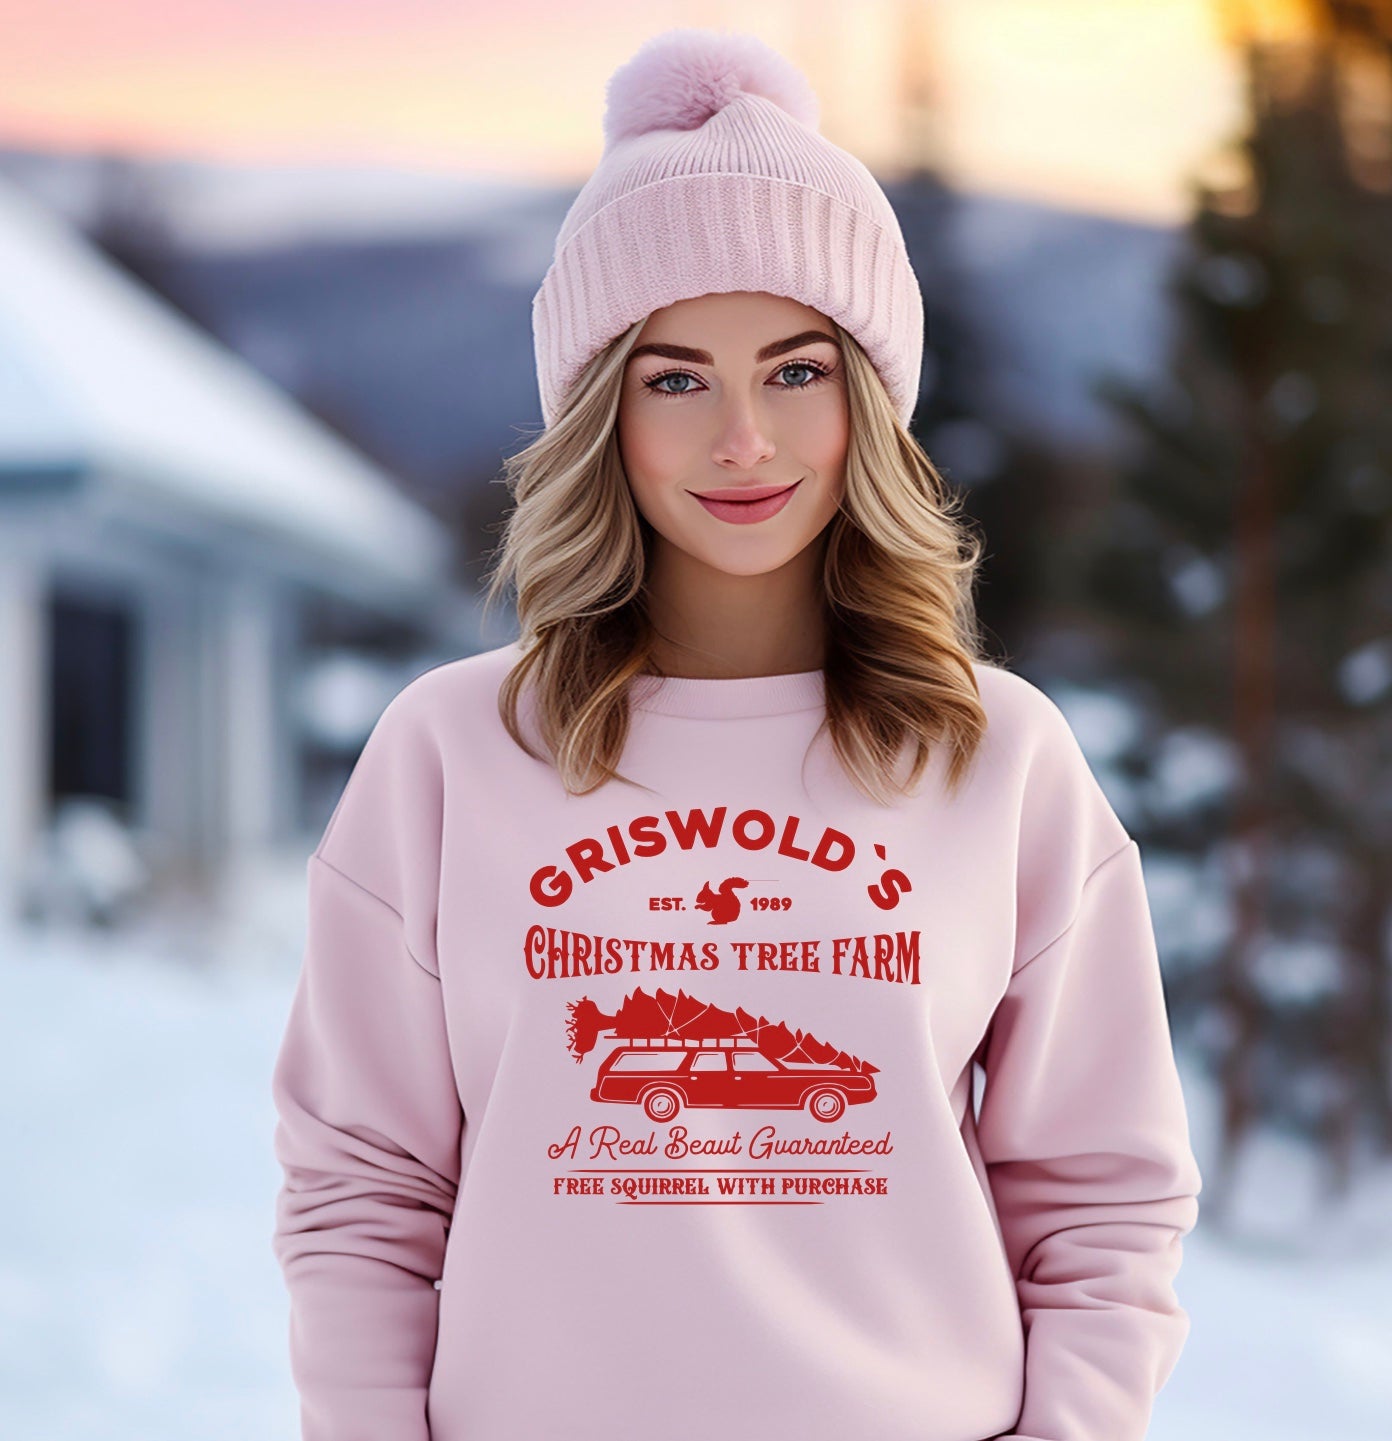 Griswold's Christmas tree farm unisex crewneck sweatshirt in pink with red graphic